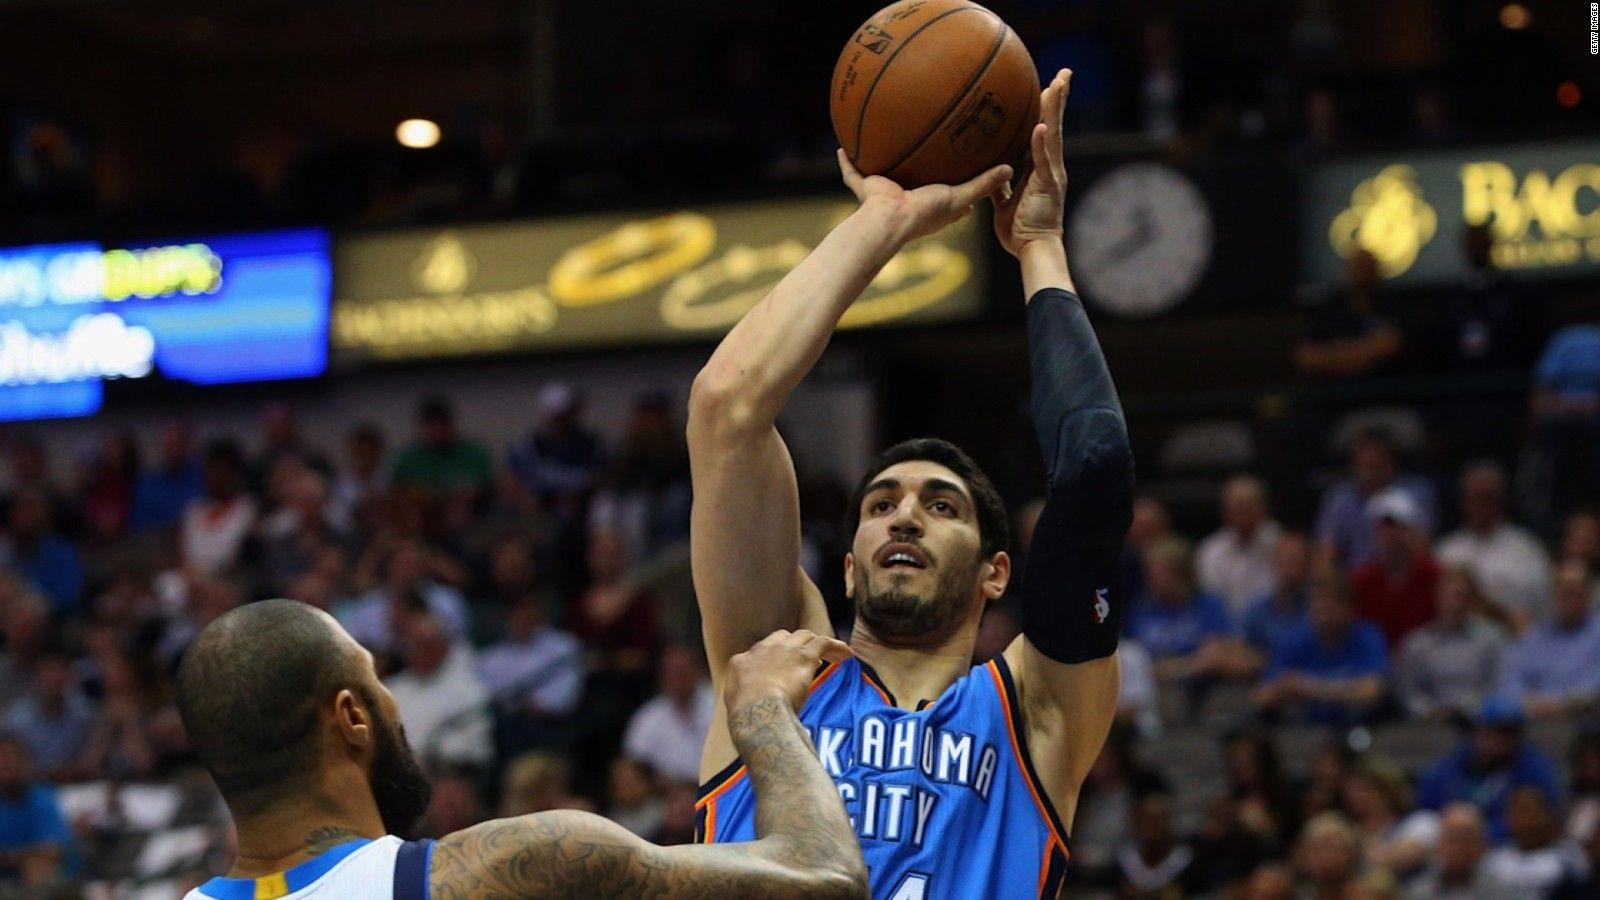 Enes Kanter: Father of NBA player detained in Turkey